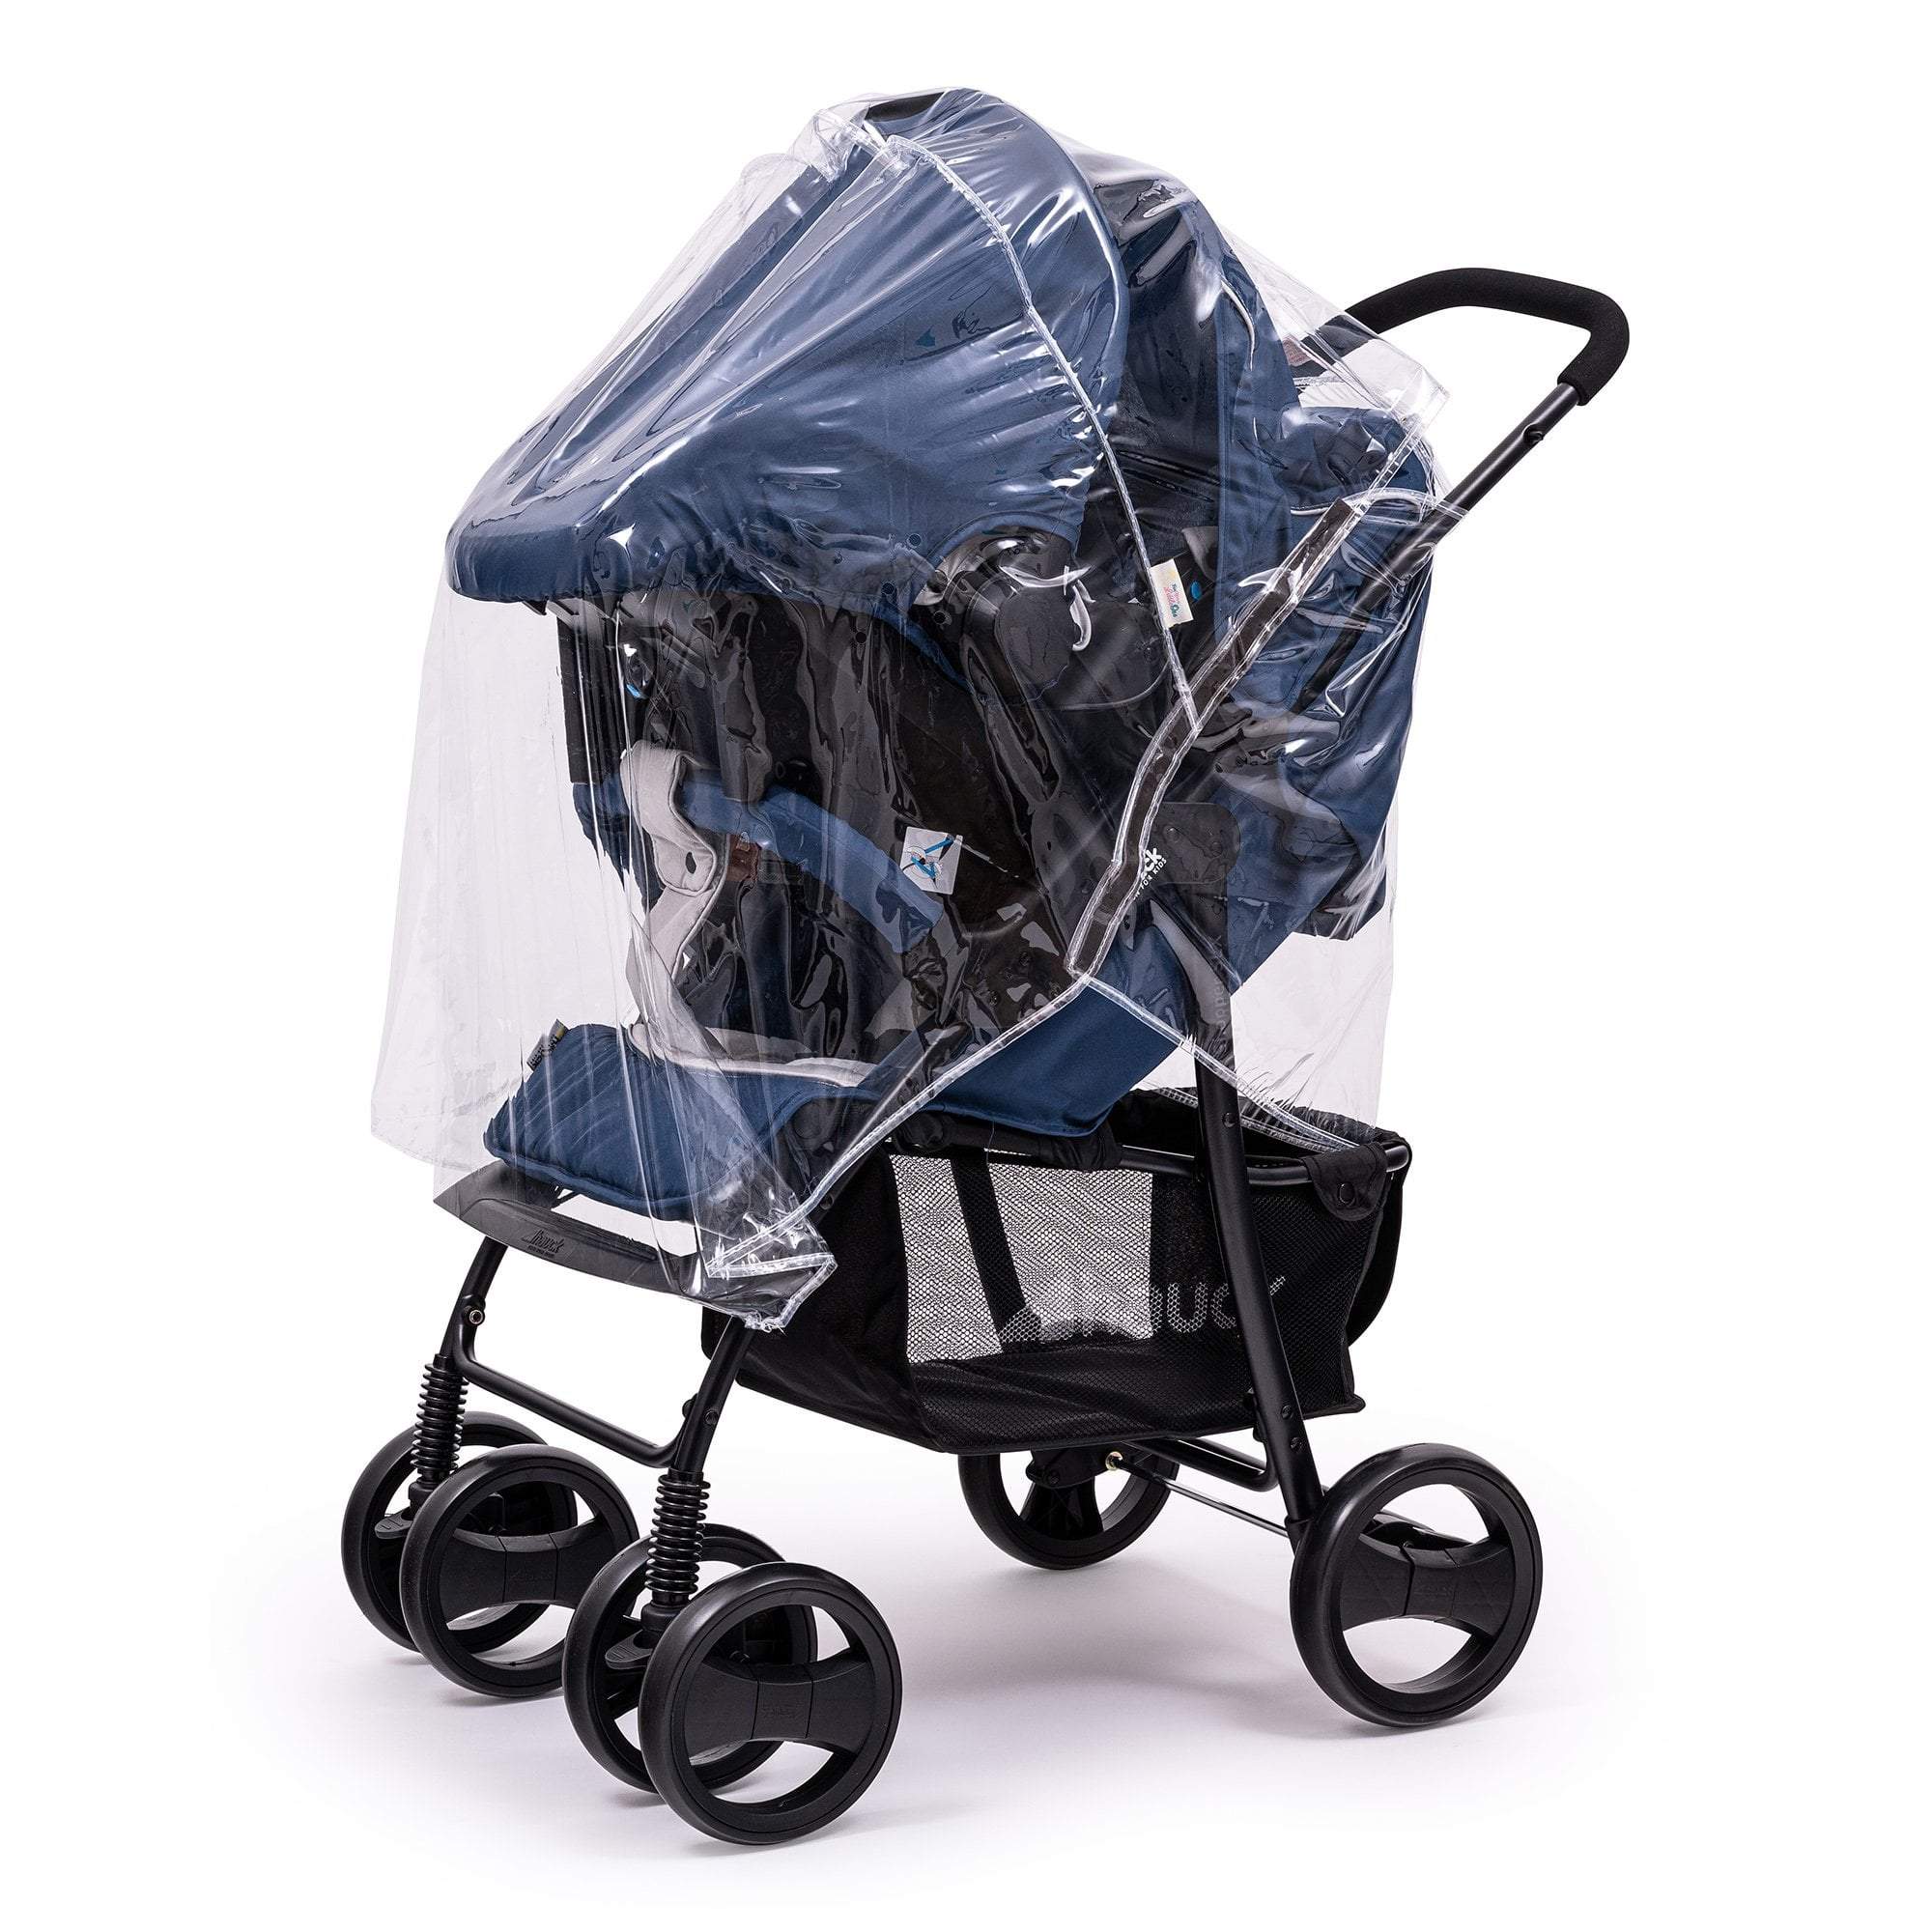 Travel System Raincover Compatible with Little Shield - Fits All Models - For Your Little One